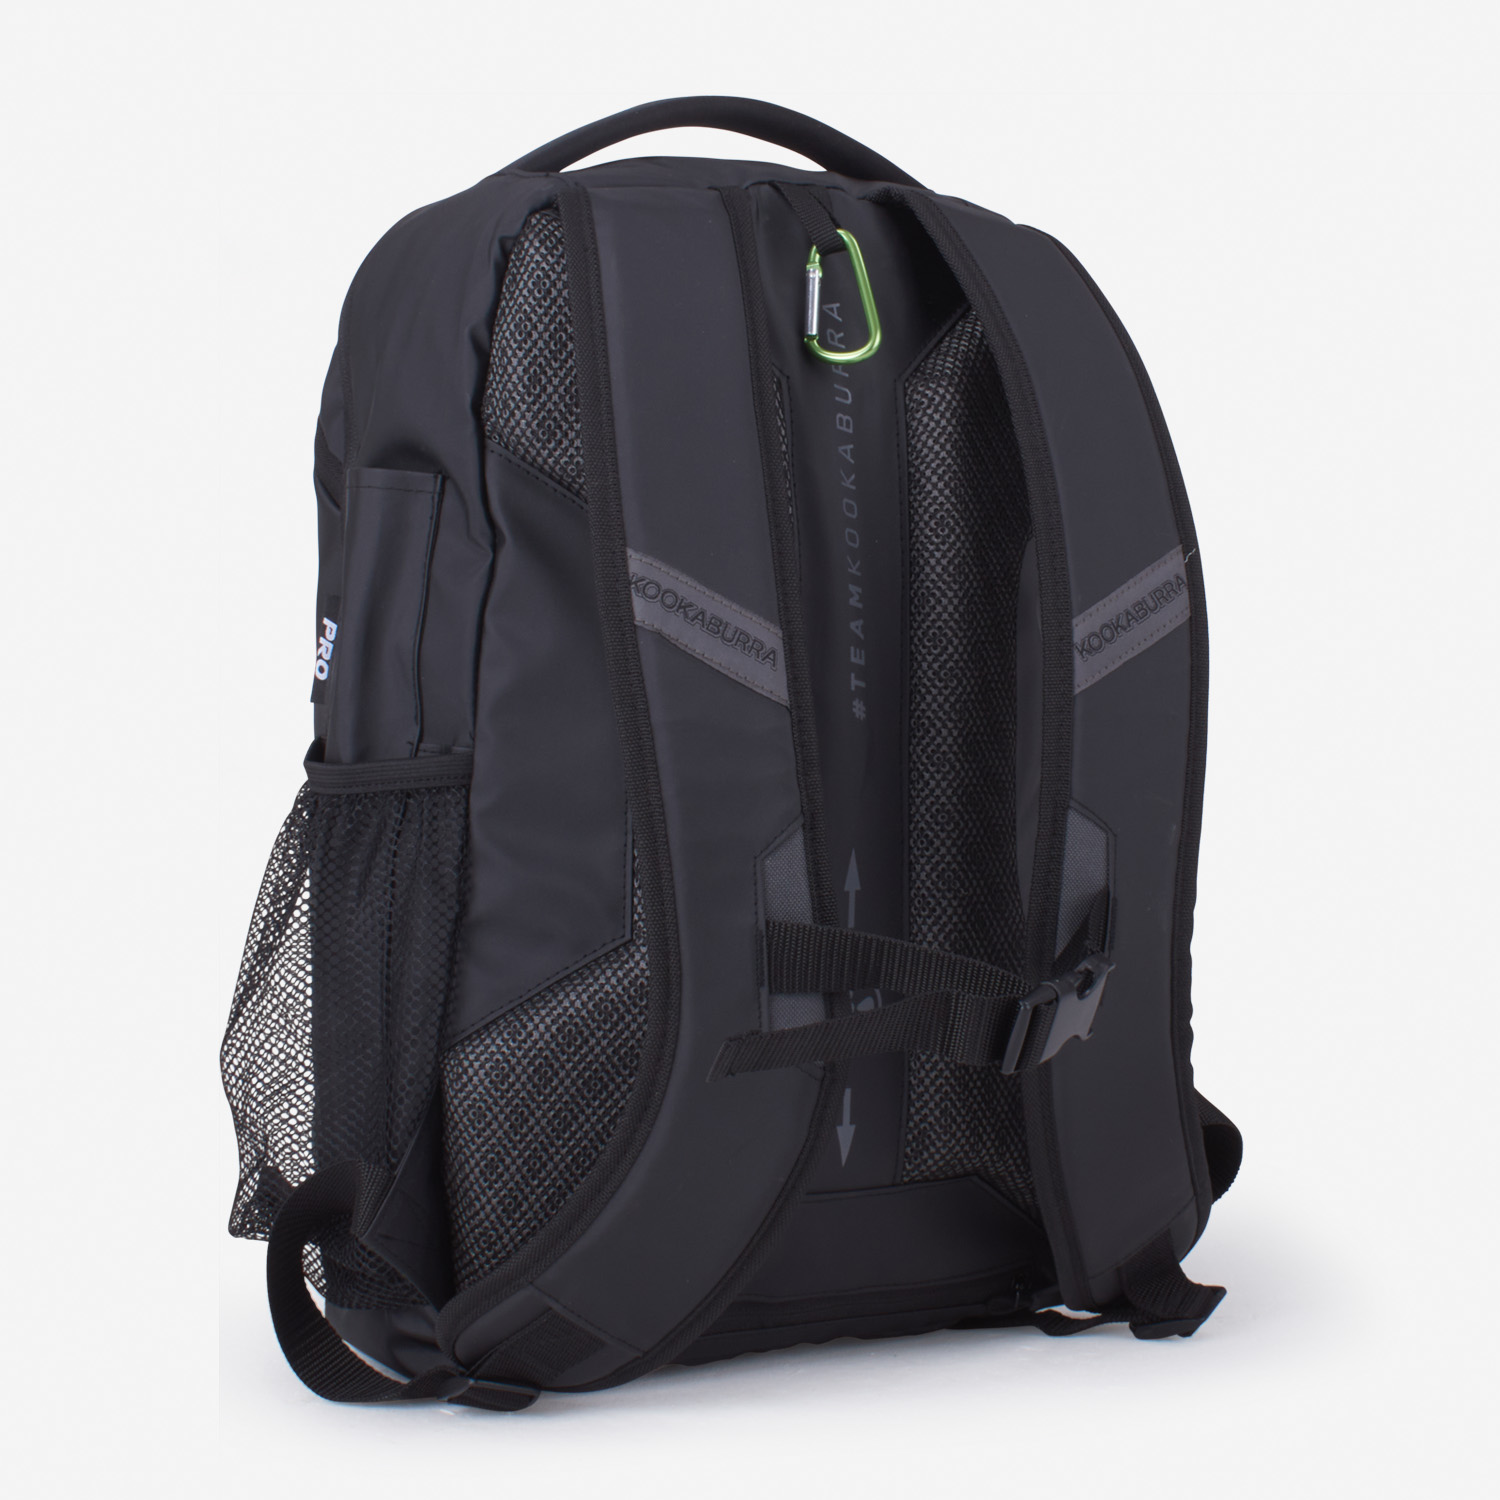 Pro Players Hockey Backpack